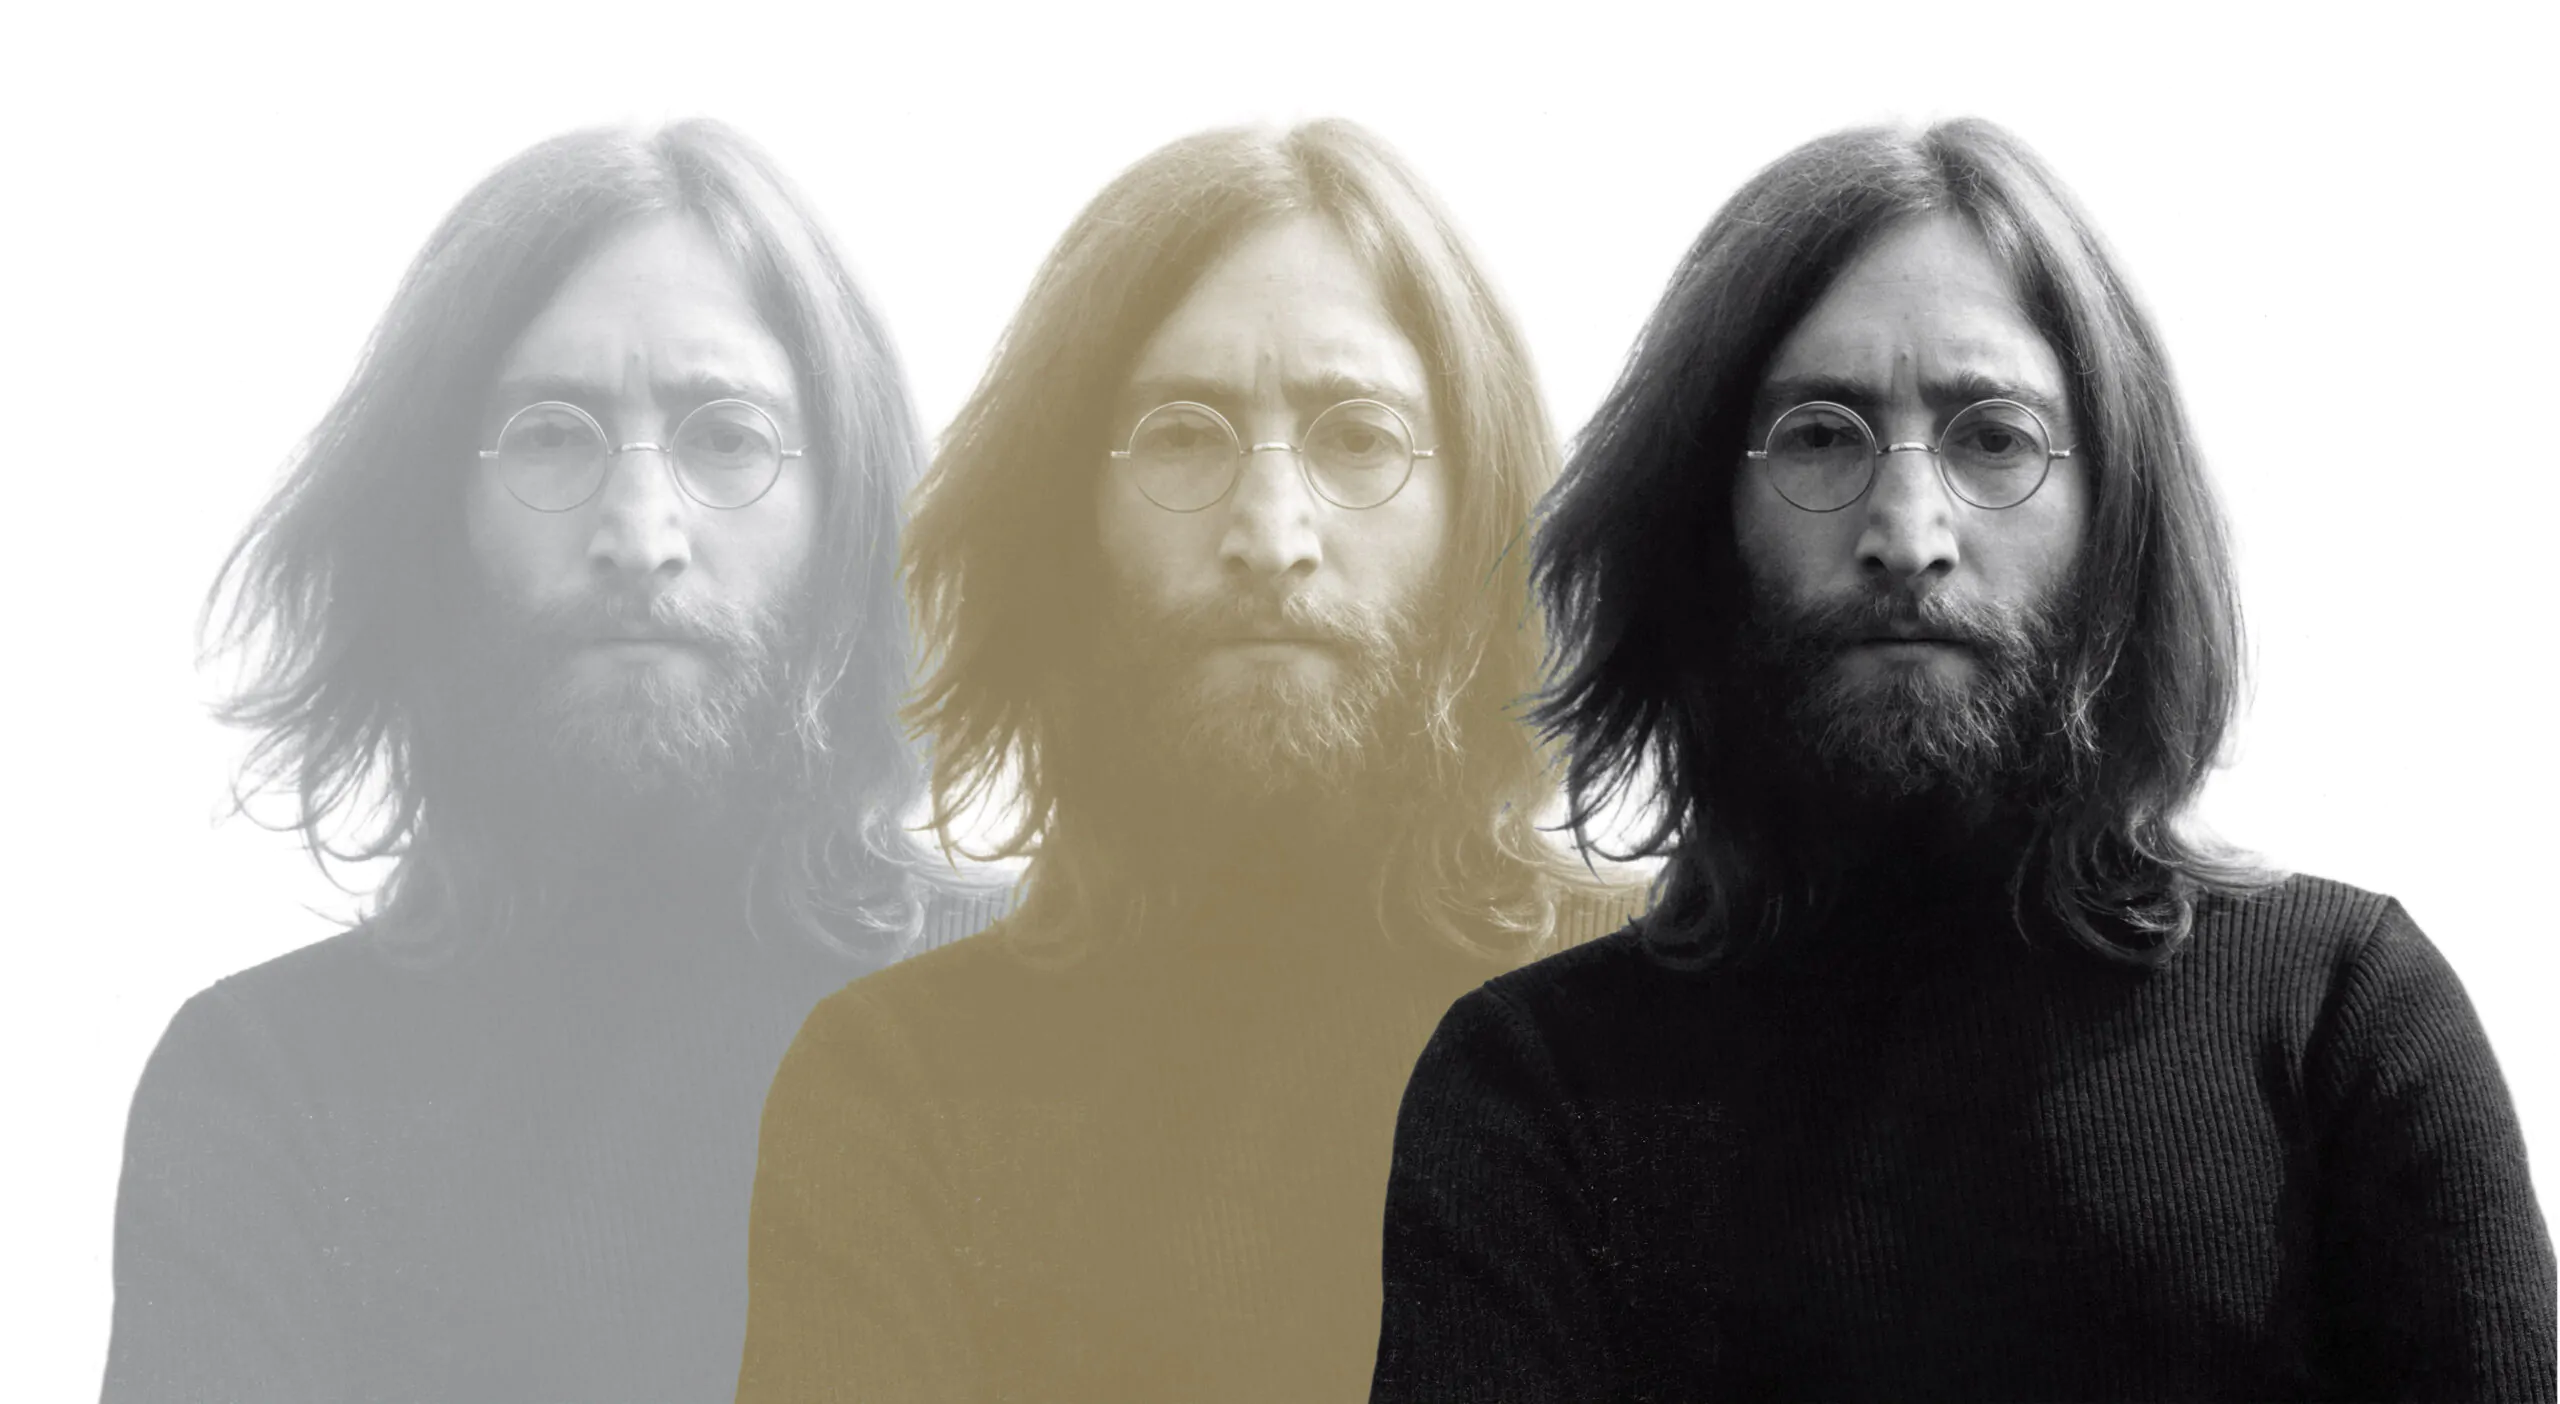 JOHN LENNON’S 80th Birthday will be celebrated with LENNON80 – A dedicated, pop up TV channel